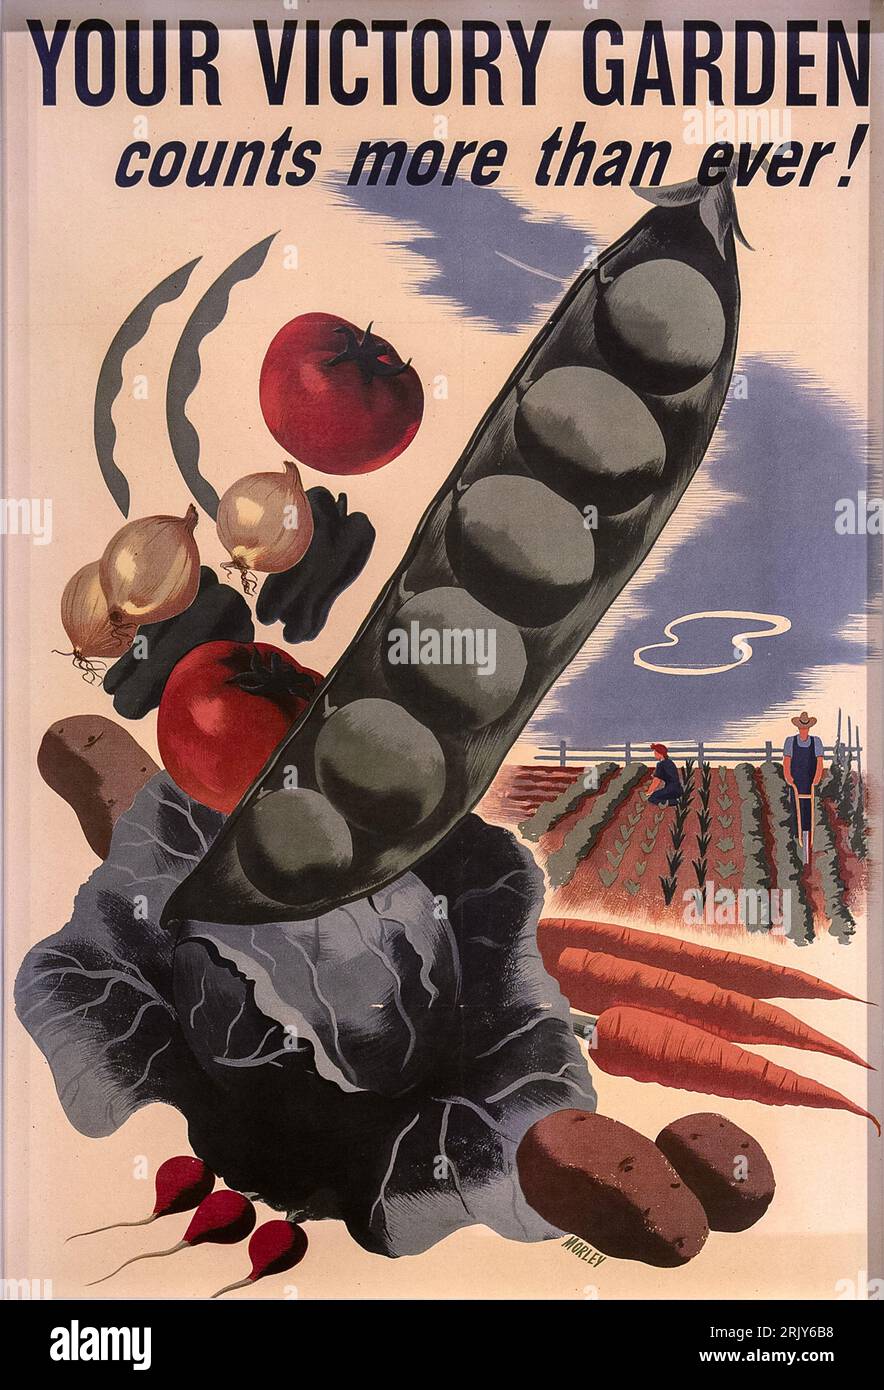 Your victory garden counts more than ever war poster Stock Photo